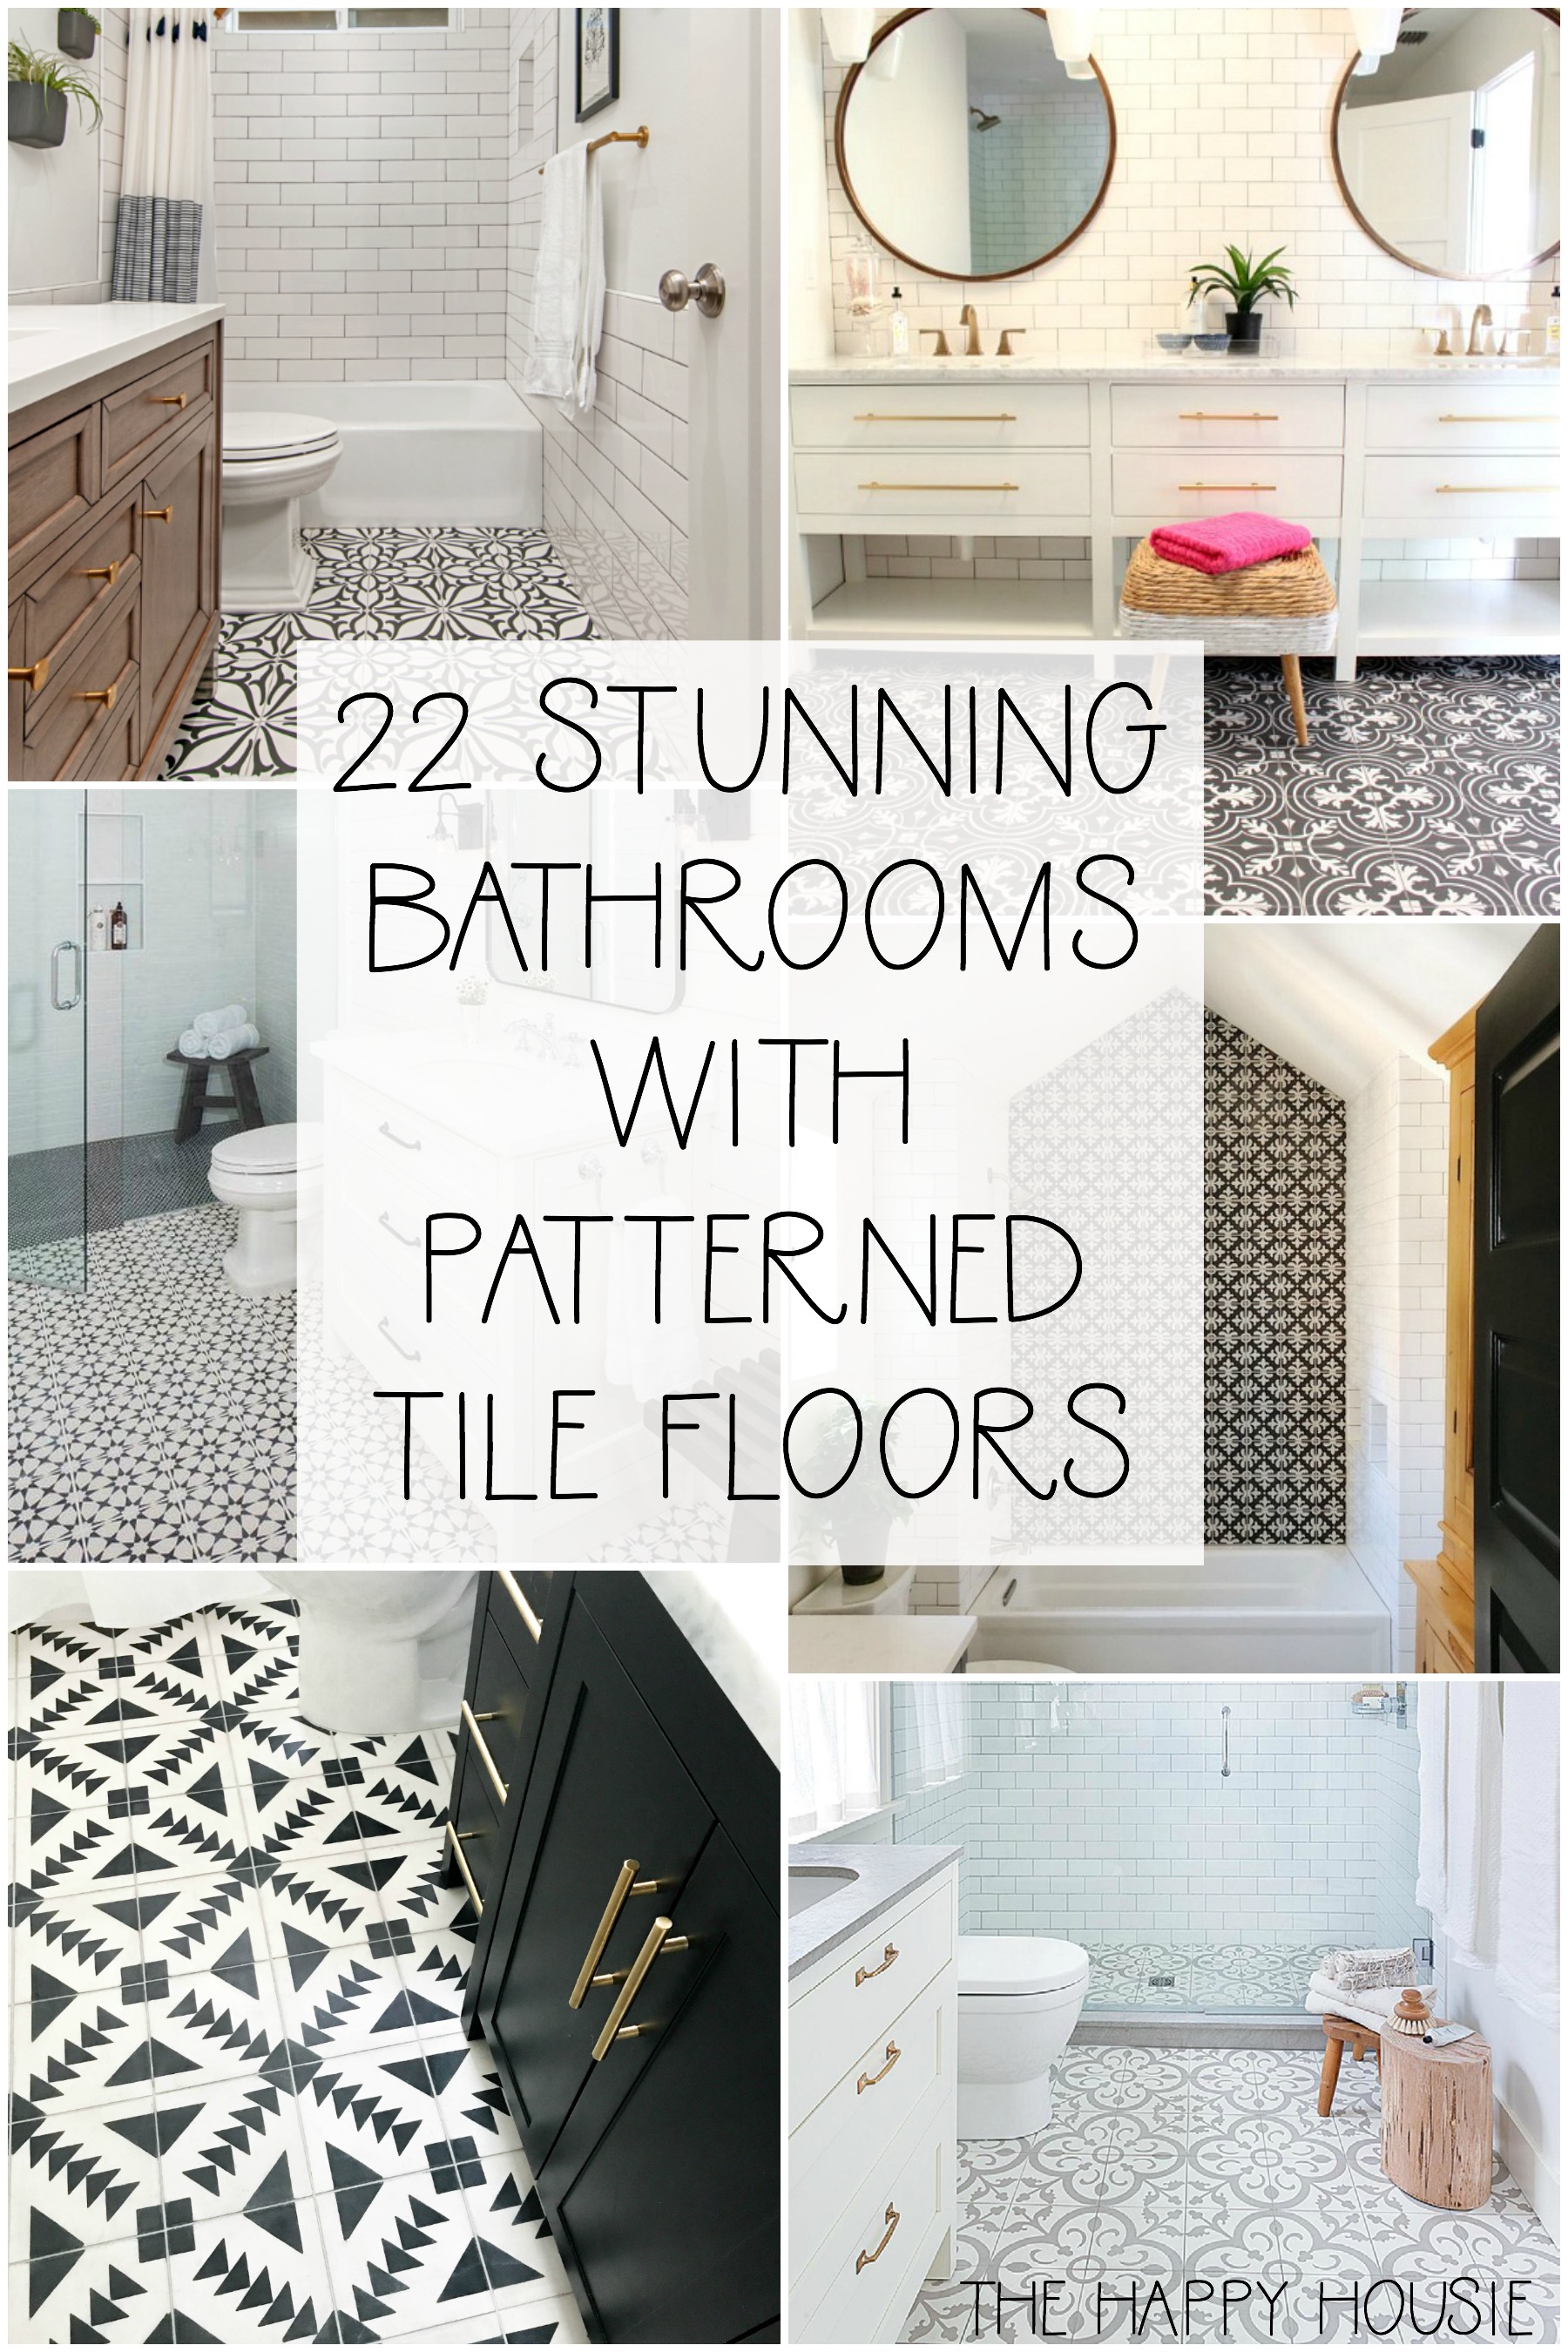 22 stunning bathroom with patterned tile floors poster.